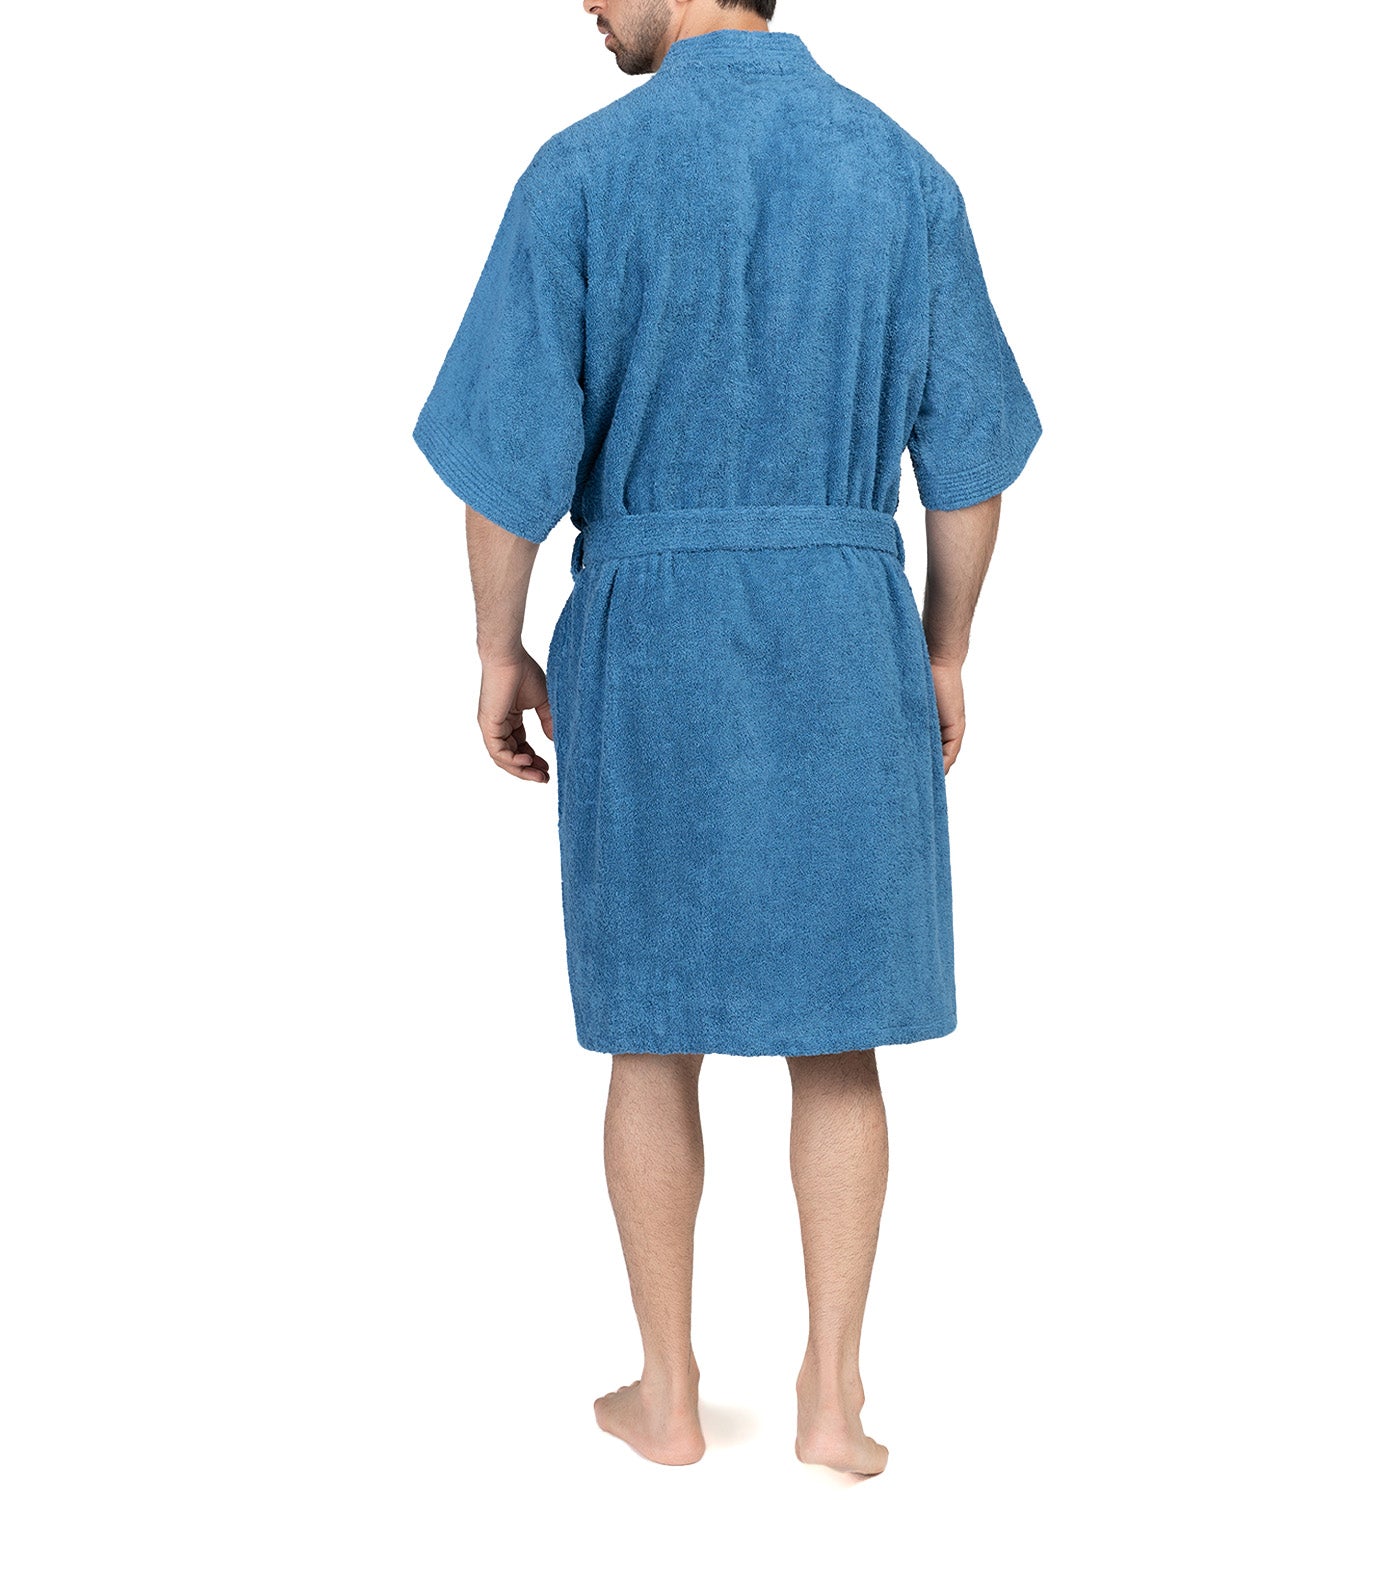 Terry Robe for Male - Blue Denim